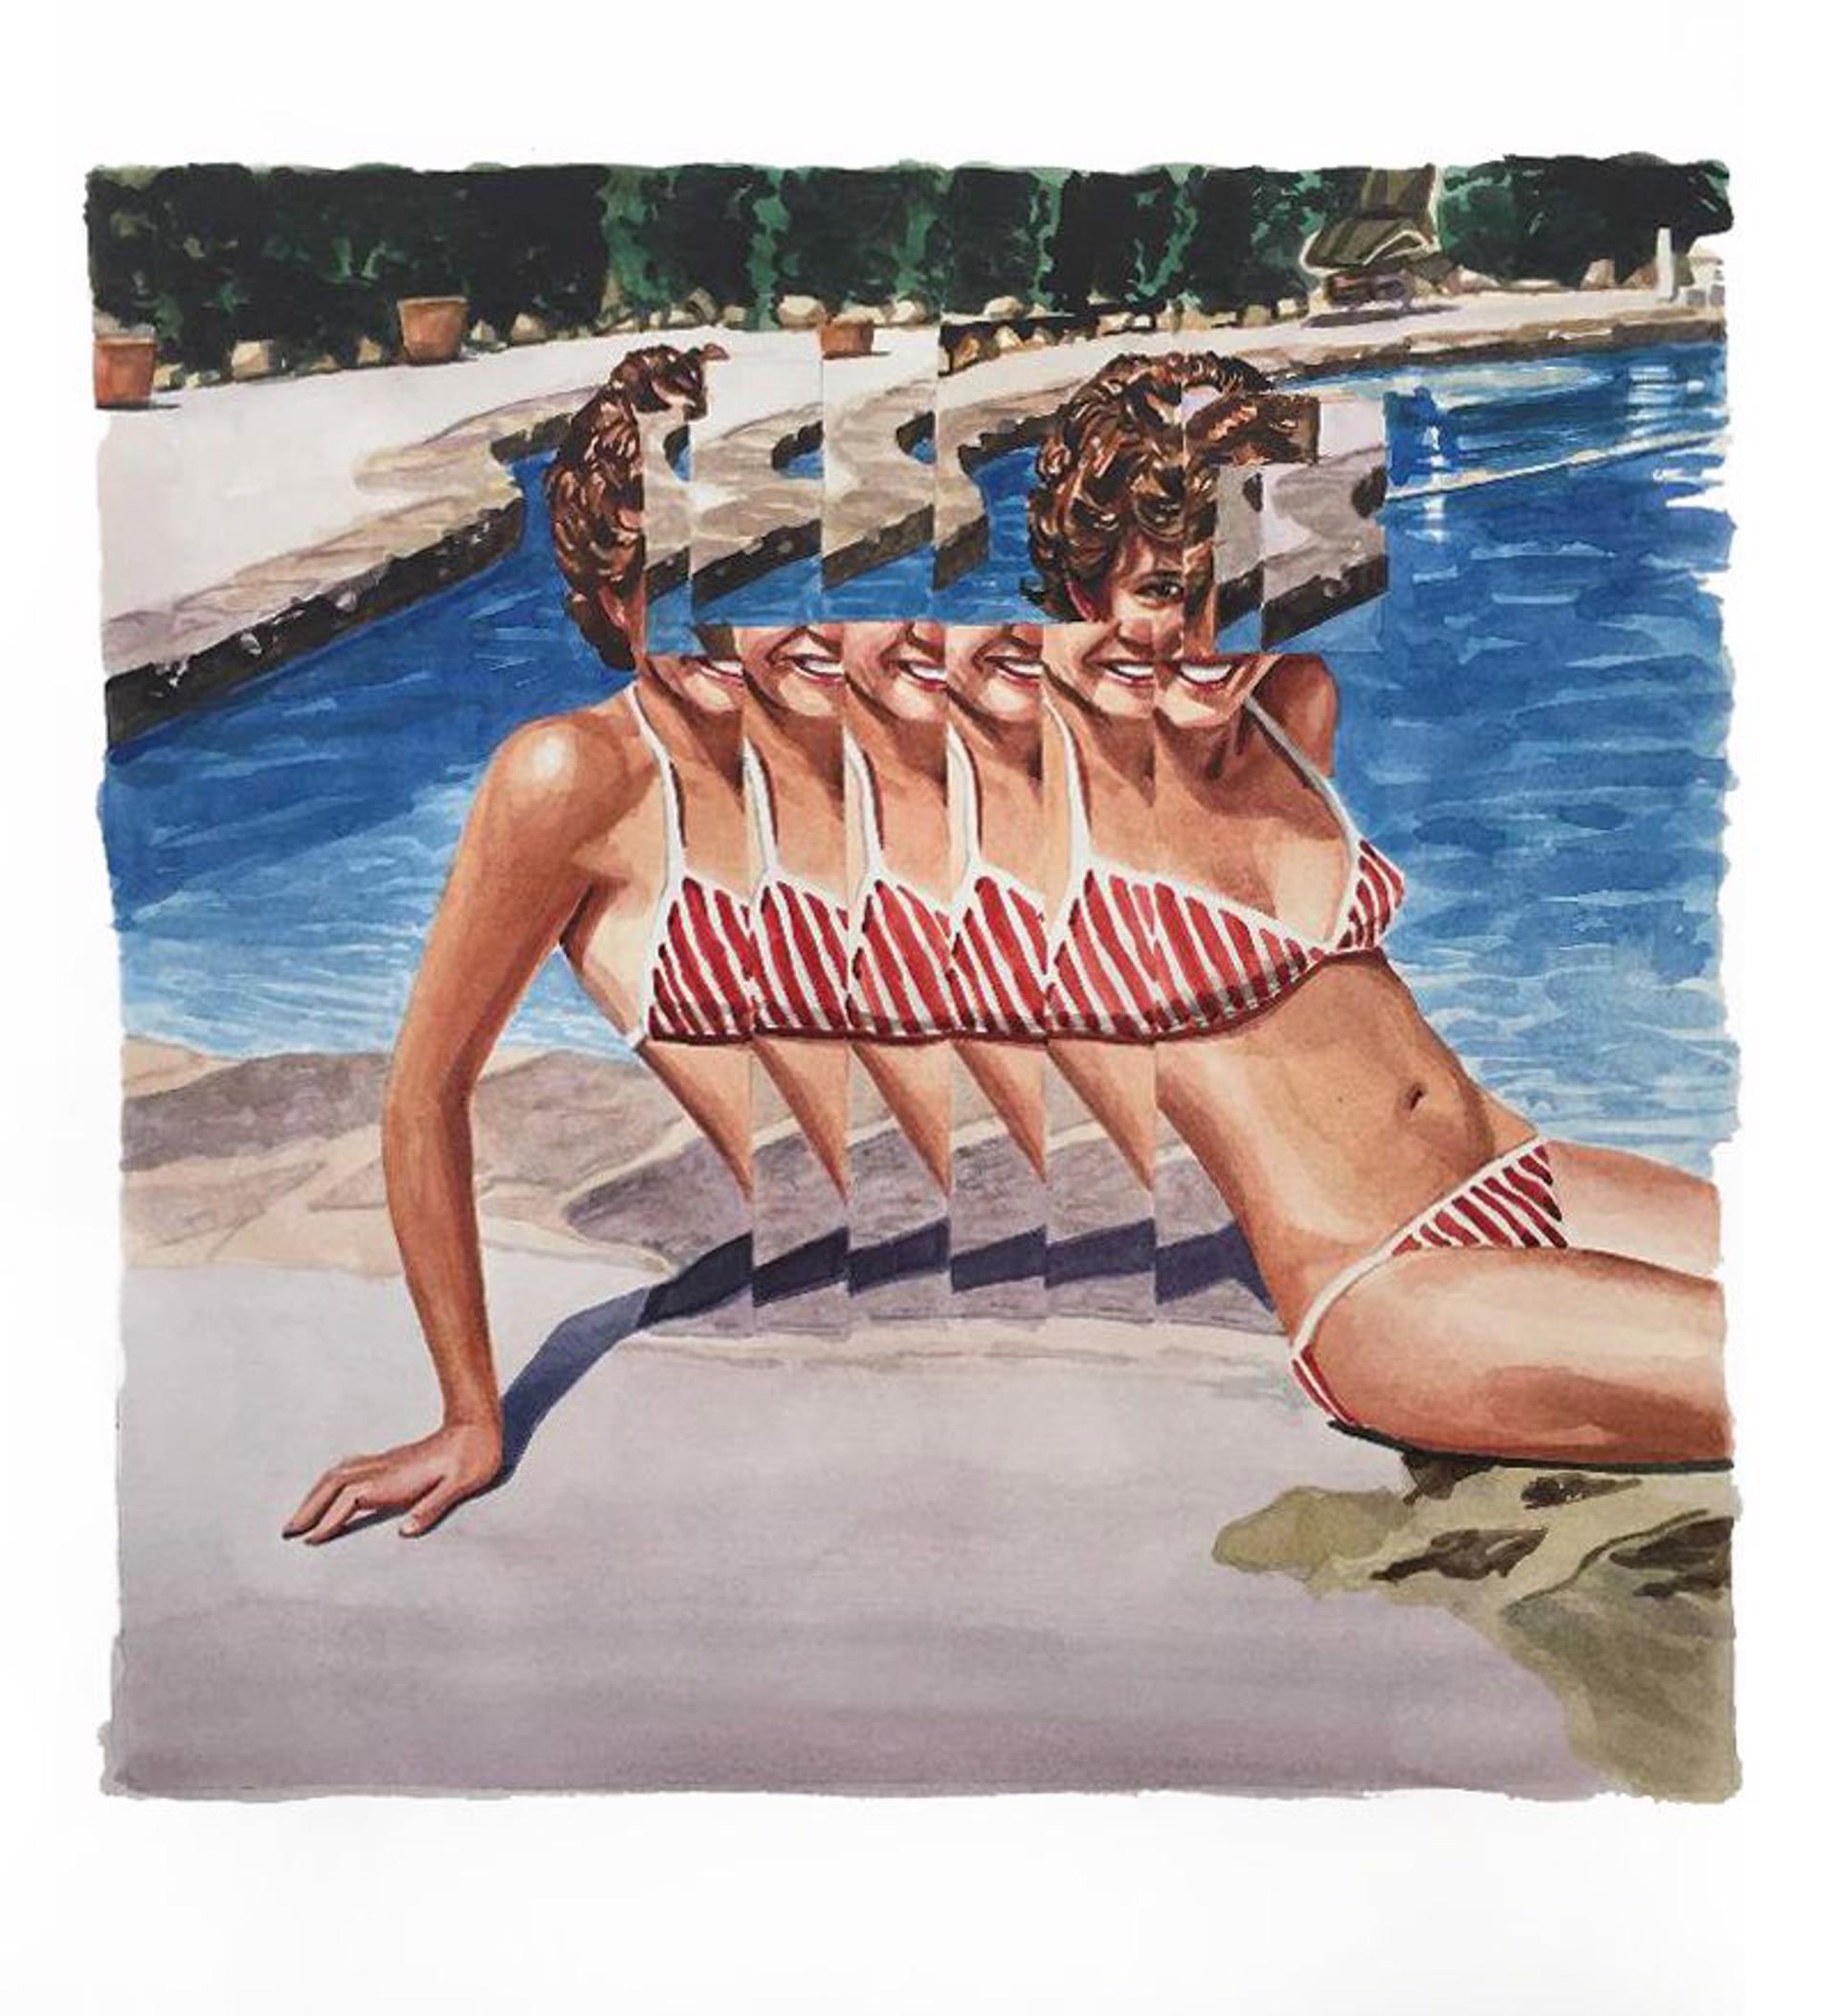 Kristi by the Pool by Melissa Wilkinson